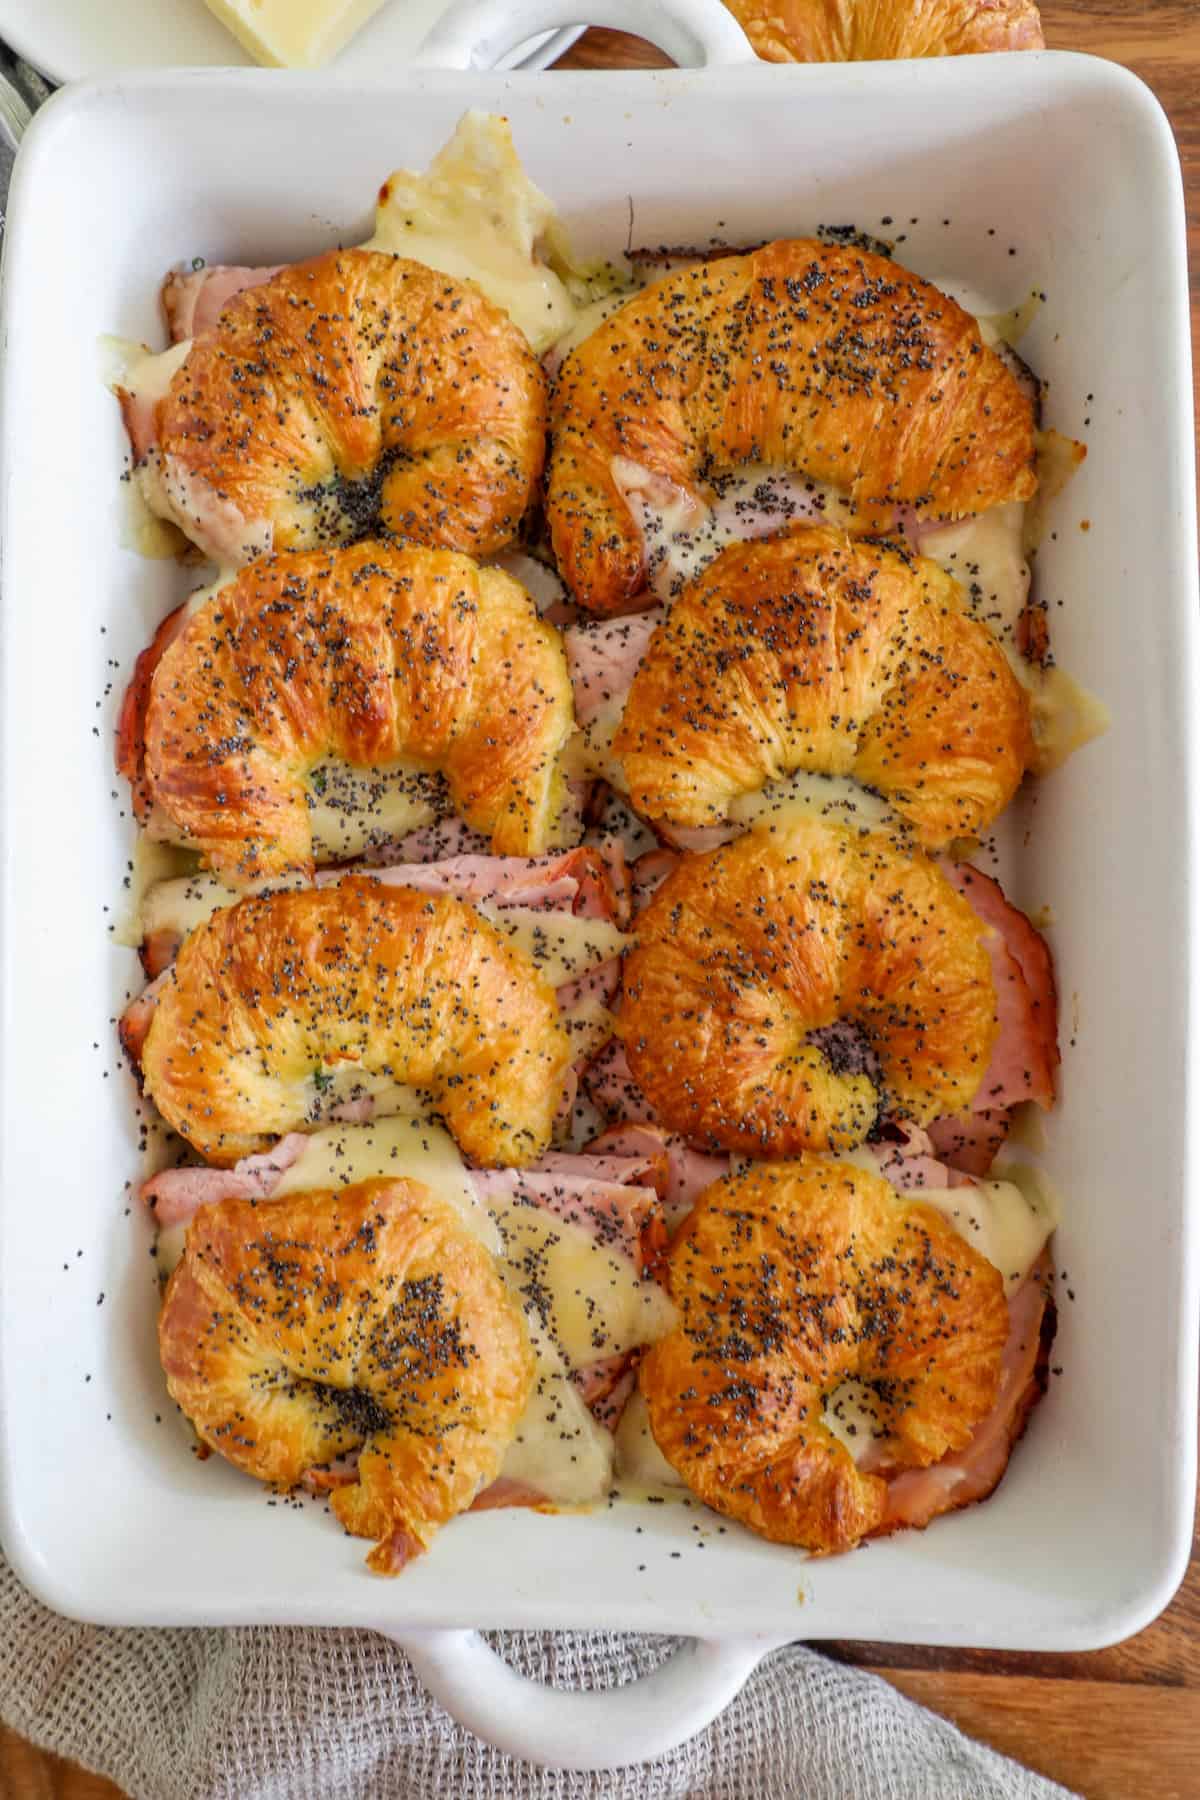 Ham and cheese croissants in a baking dish.